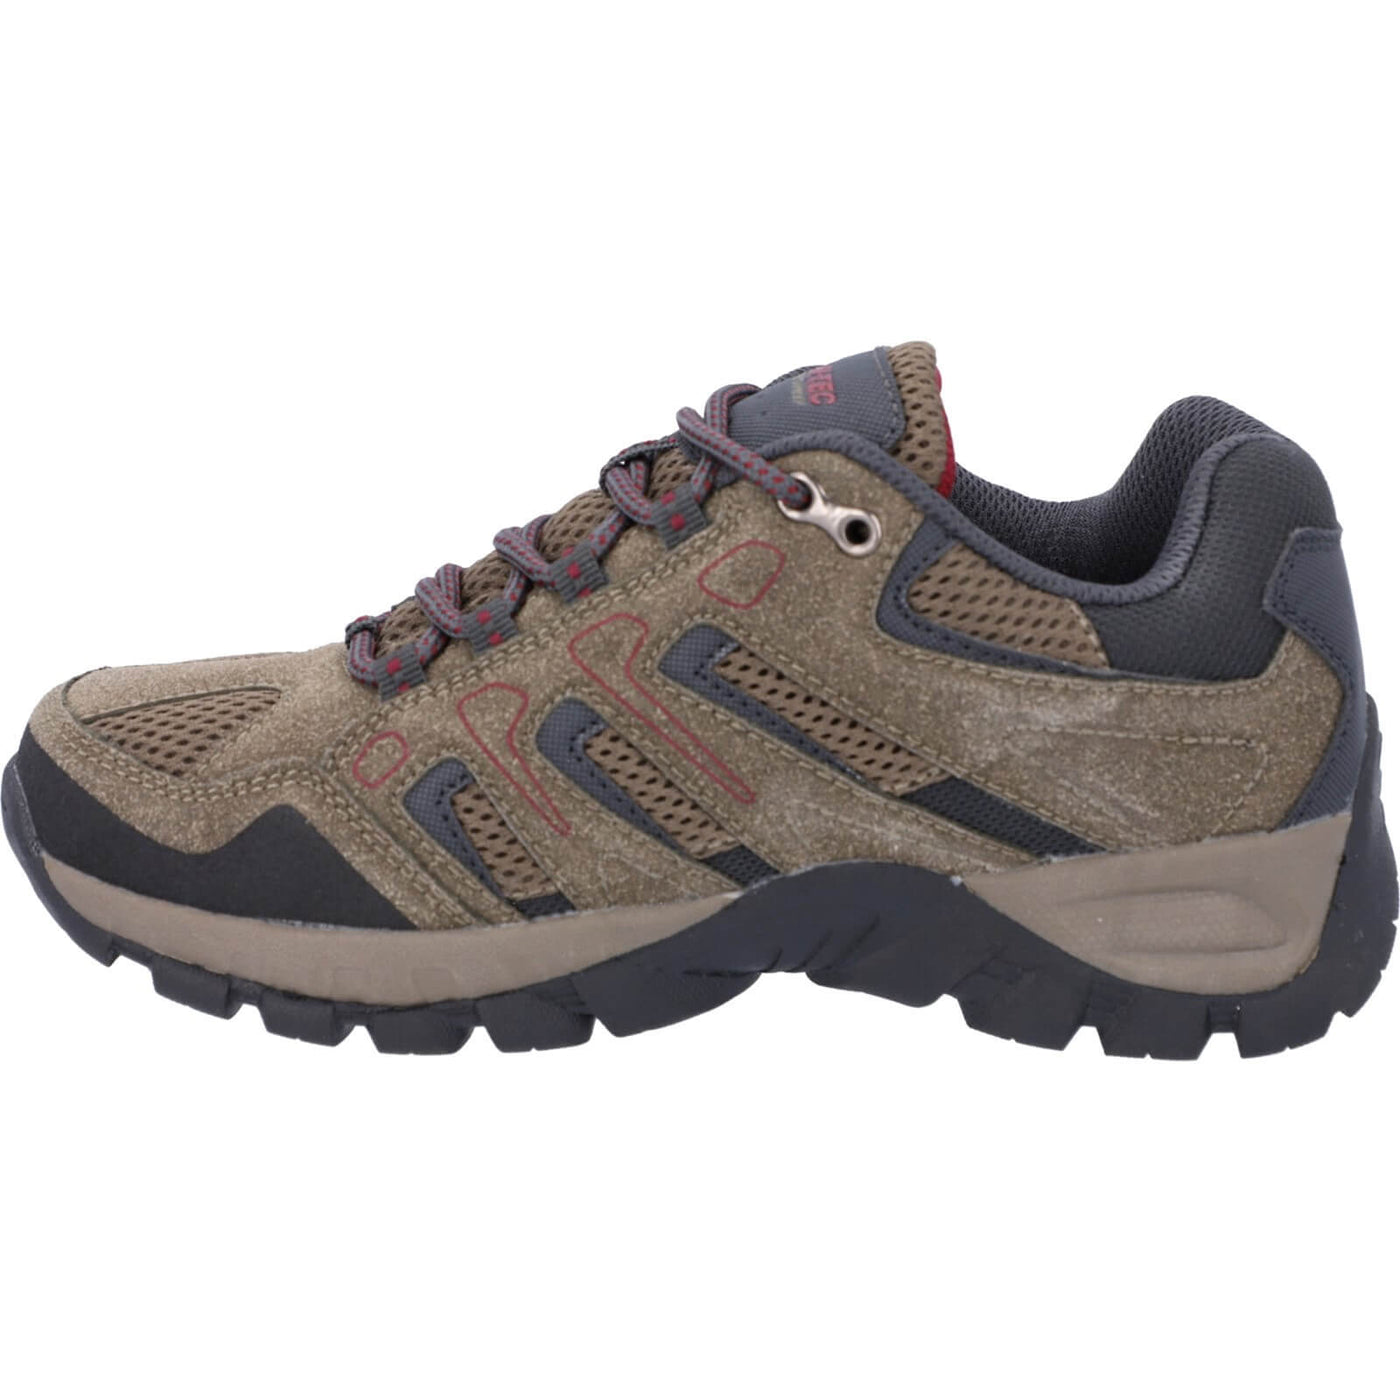 Hi-Tec Torca Low Lightweight Waterproof Hiking Boots Dark Taupe/Charcoal 5#colour_dark-taupe-charcoal